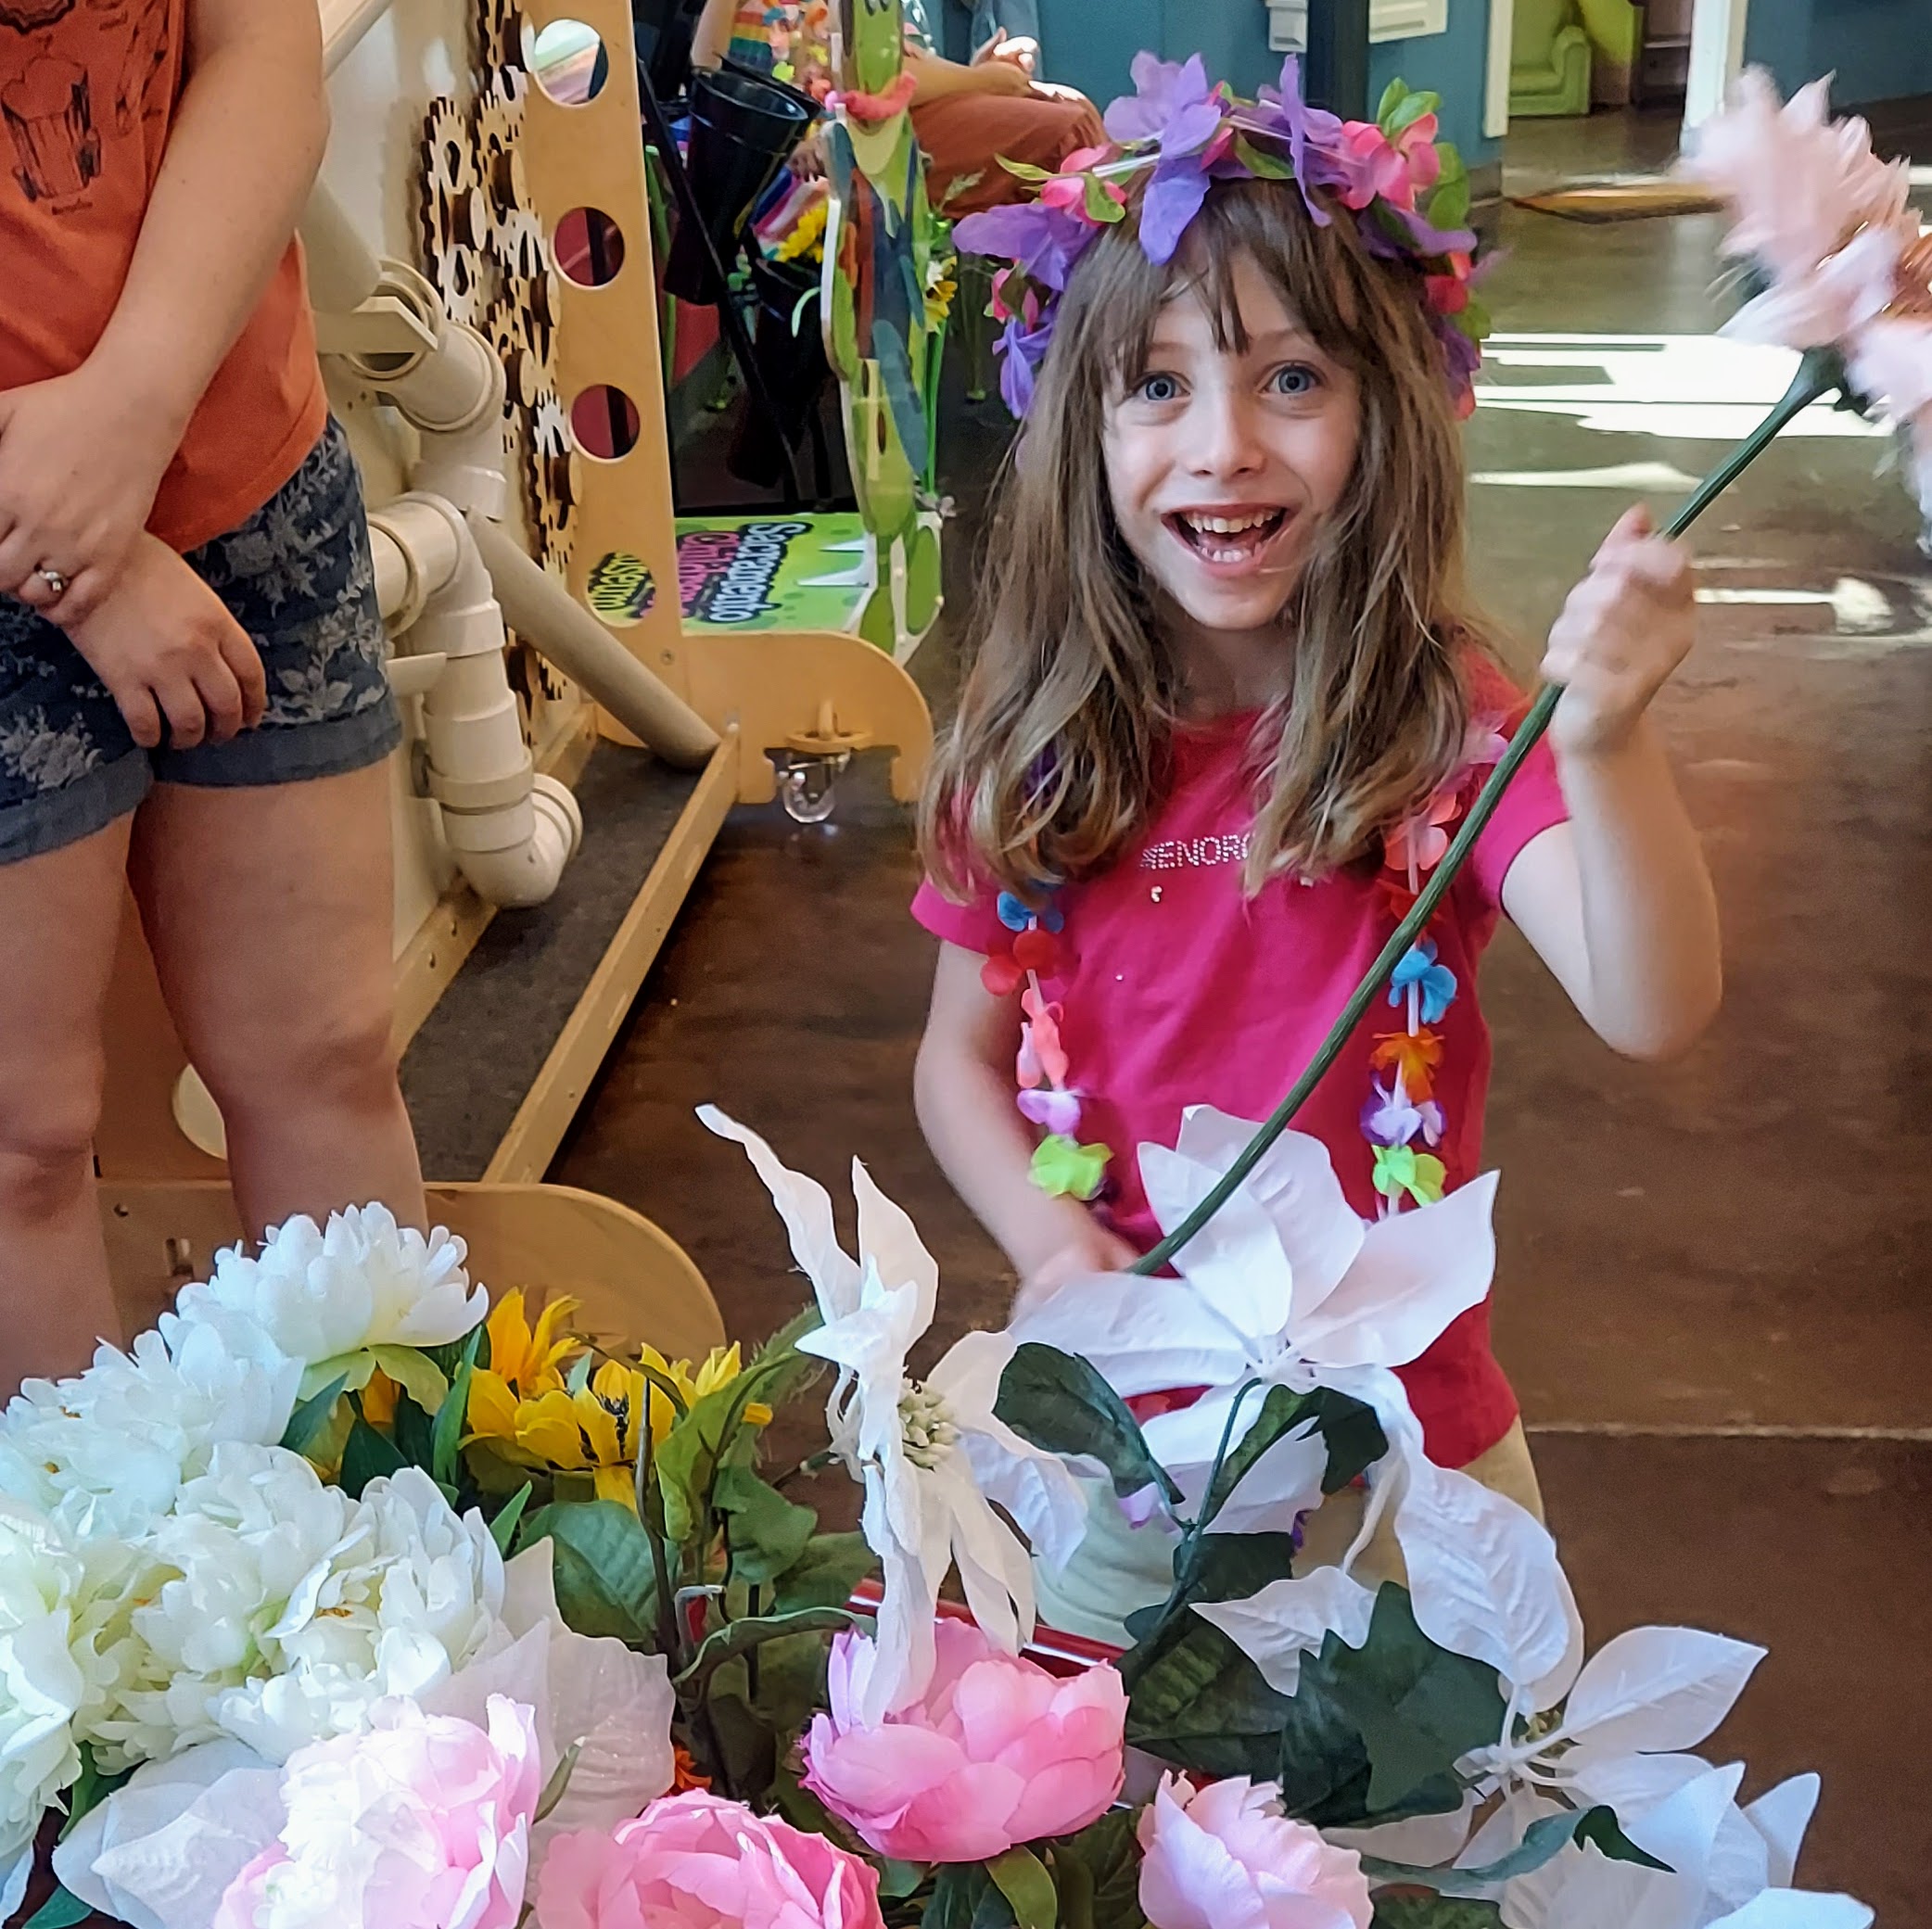 A girl smiles while holding a flower, surrounded by flowers